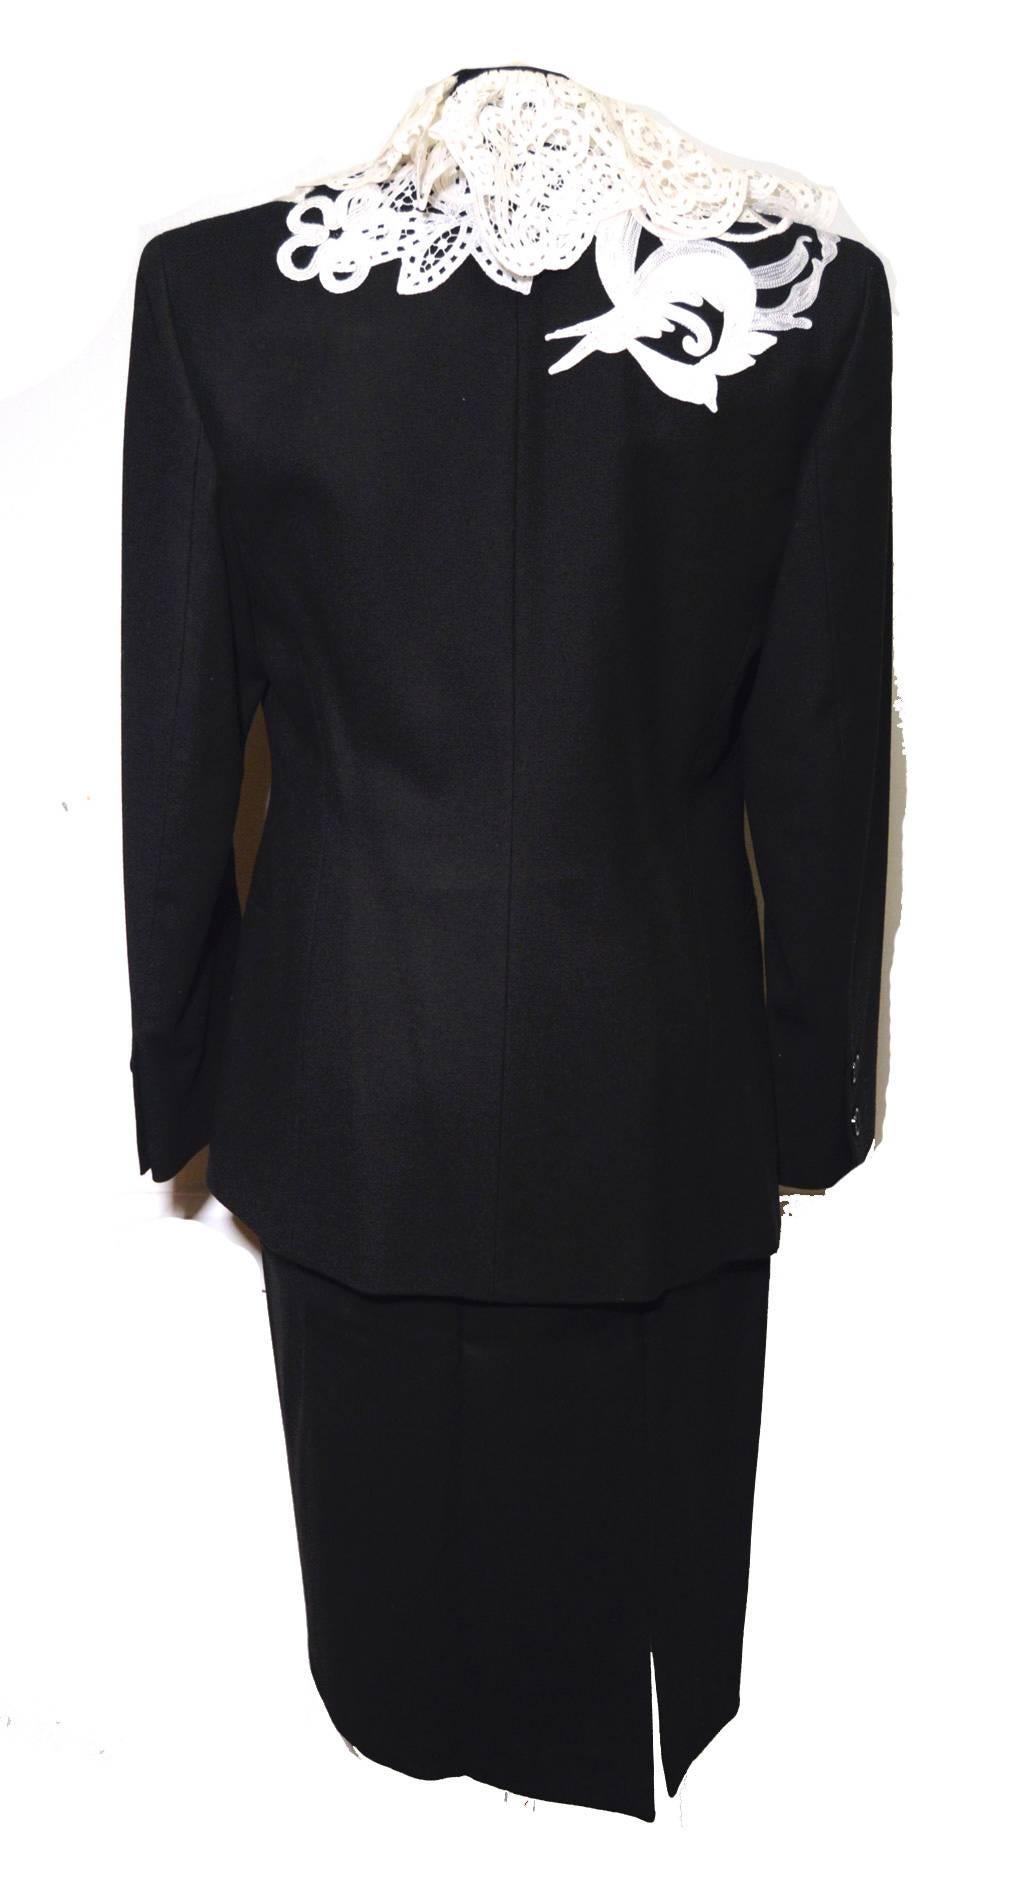 Gianfranco Ferre for Nan Dunskin vintage black wool suit c1980s 100% wool trimmed with hand made white lace and white stitched embroidery along the top neckline and lapel carrying over onto part of the bodice and back.  No front closure.  Fully